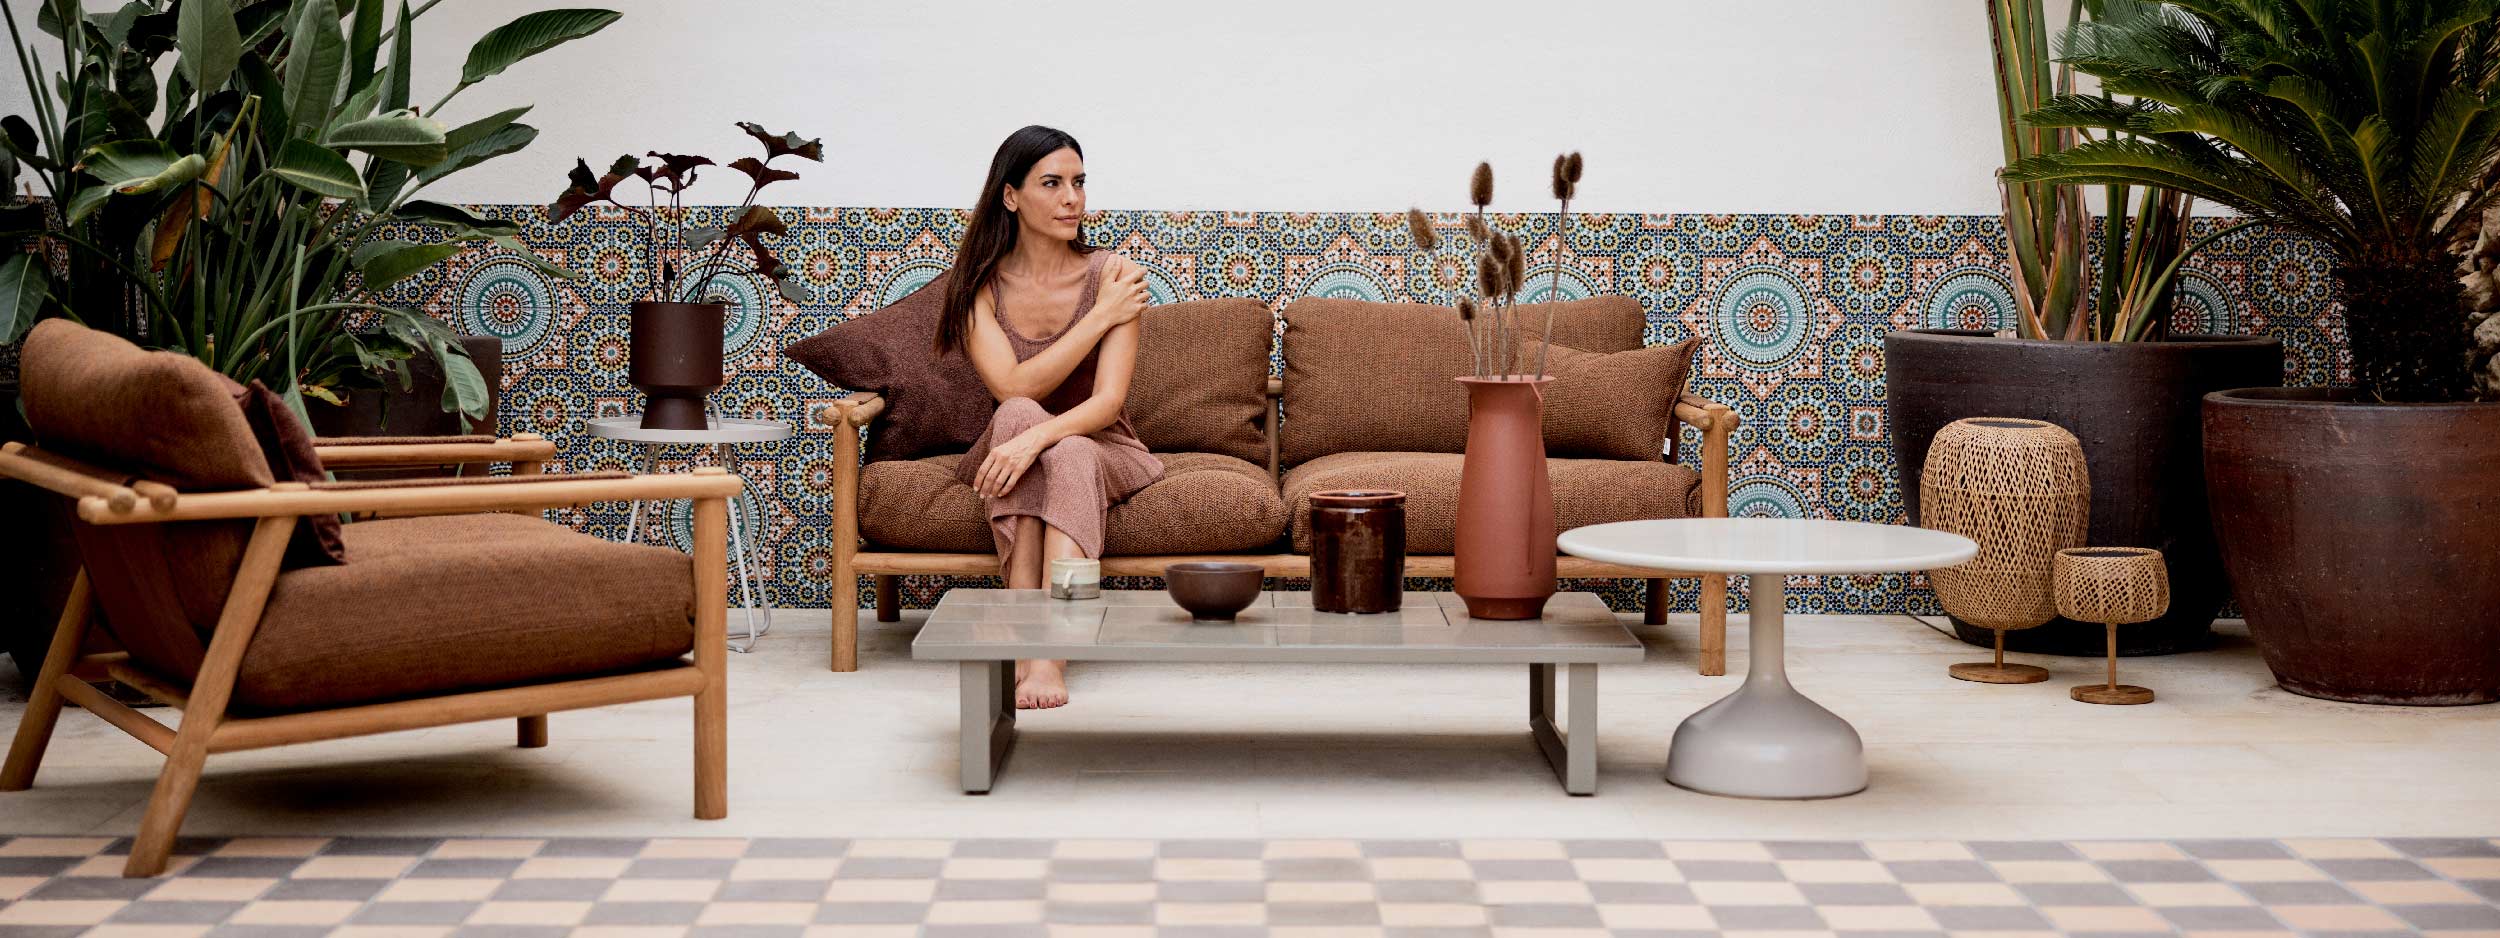 Image of woman sat in Sticks teak garden sofa with Umber Brown cushions, with colourful Moroccan tiles in the background